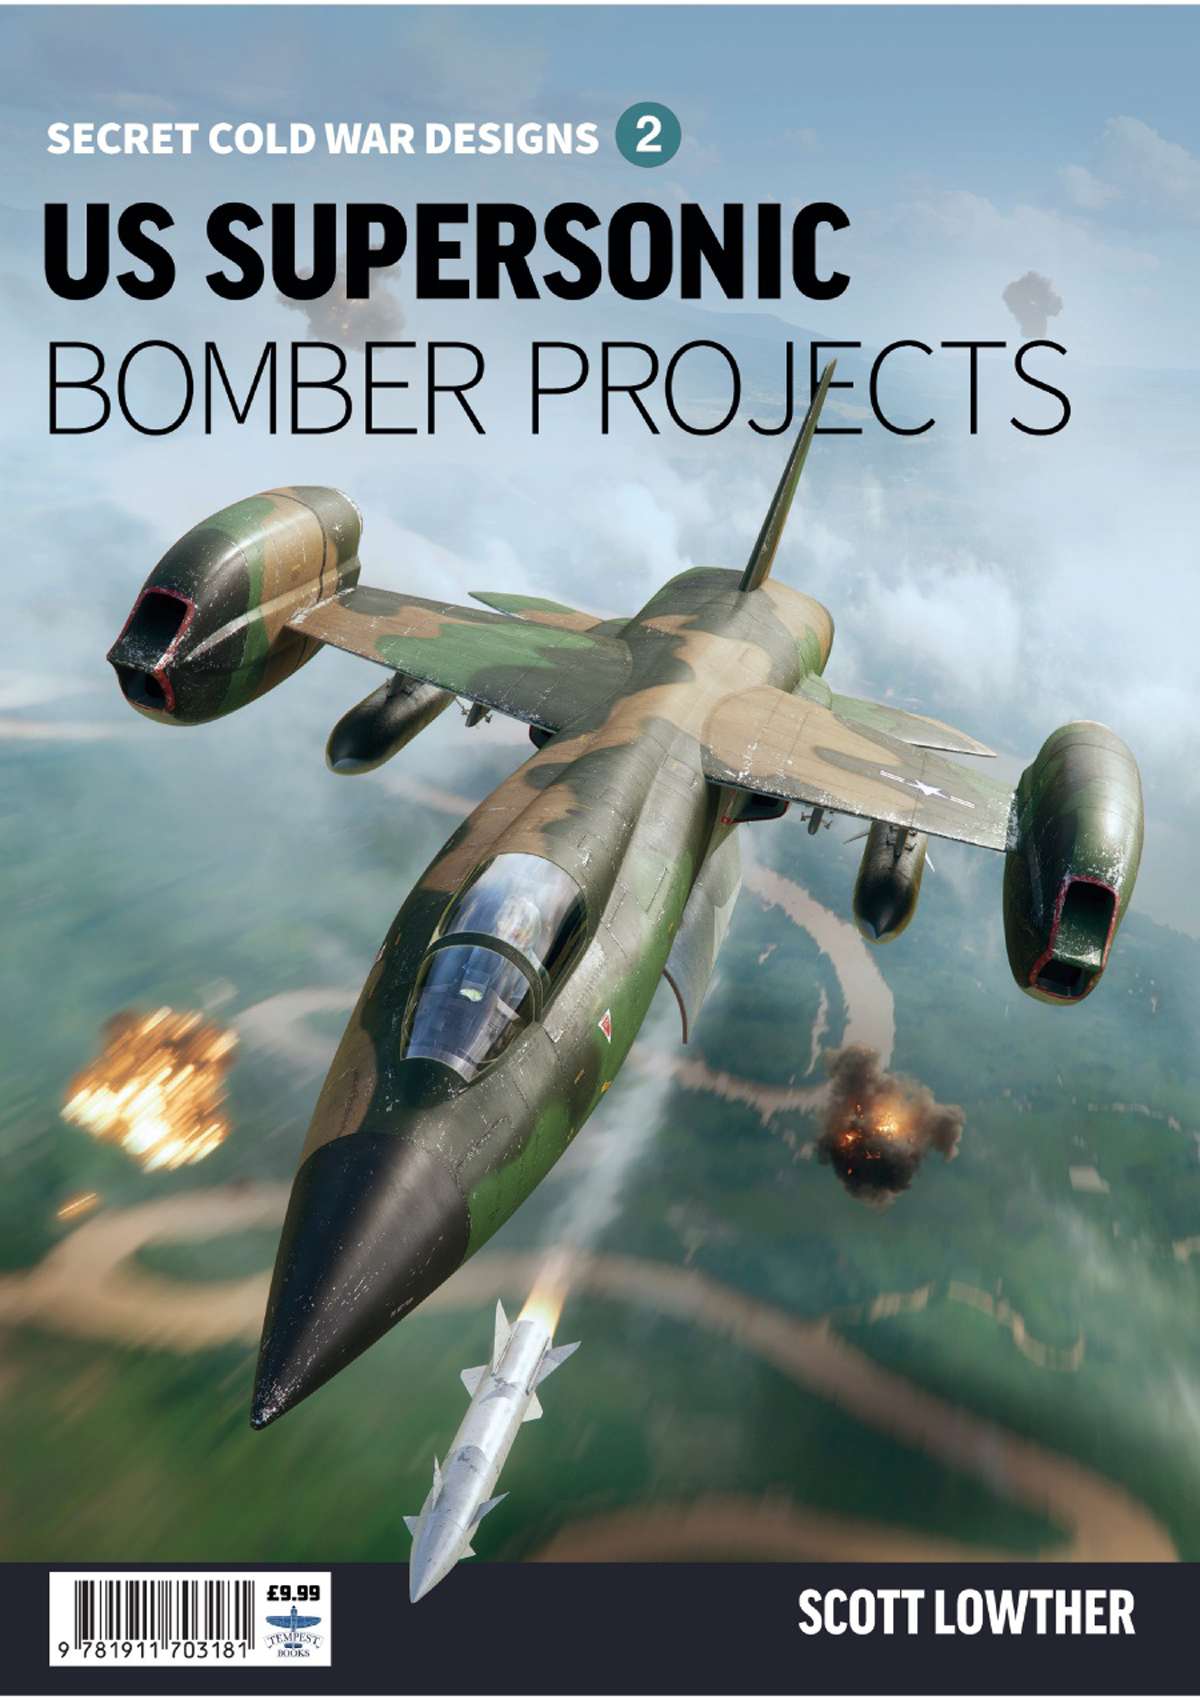 US Supersonic Bomber Projects Vol. 2 - The Unwanted Blog (2)